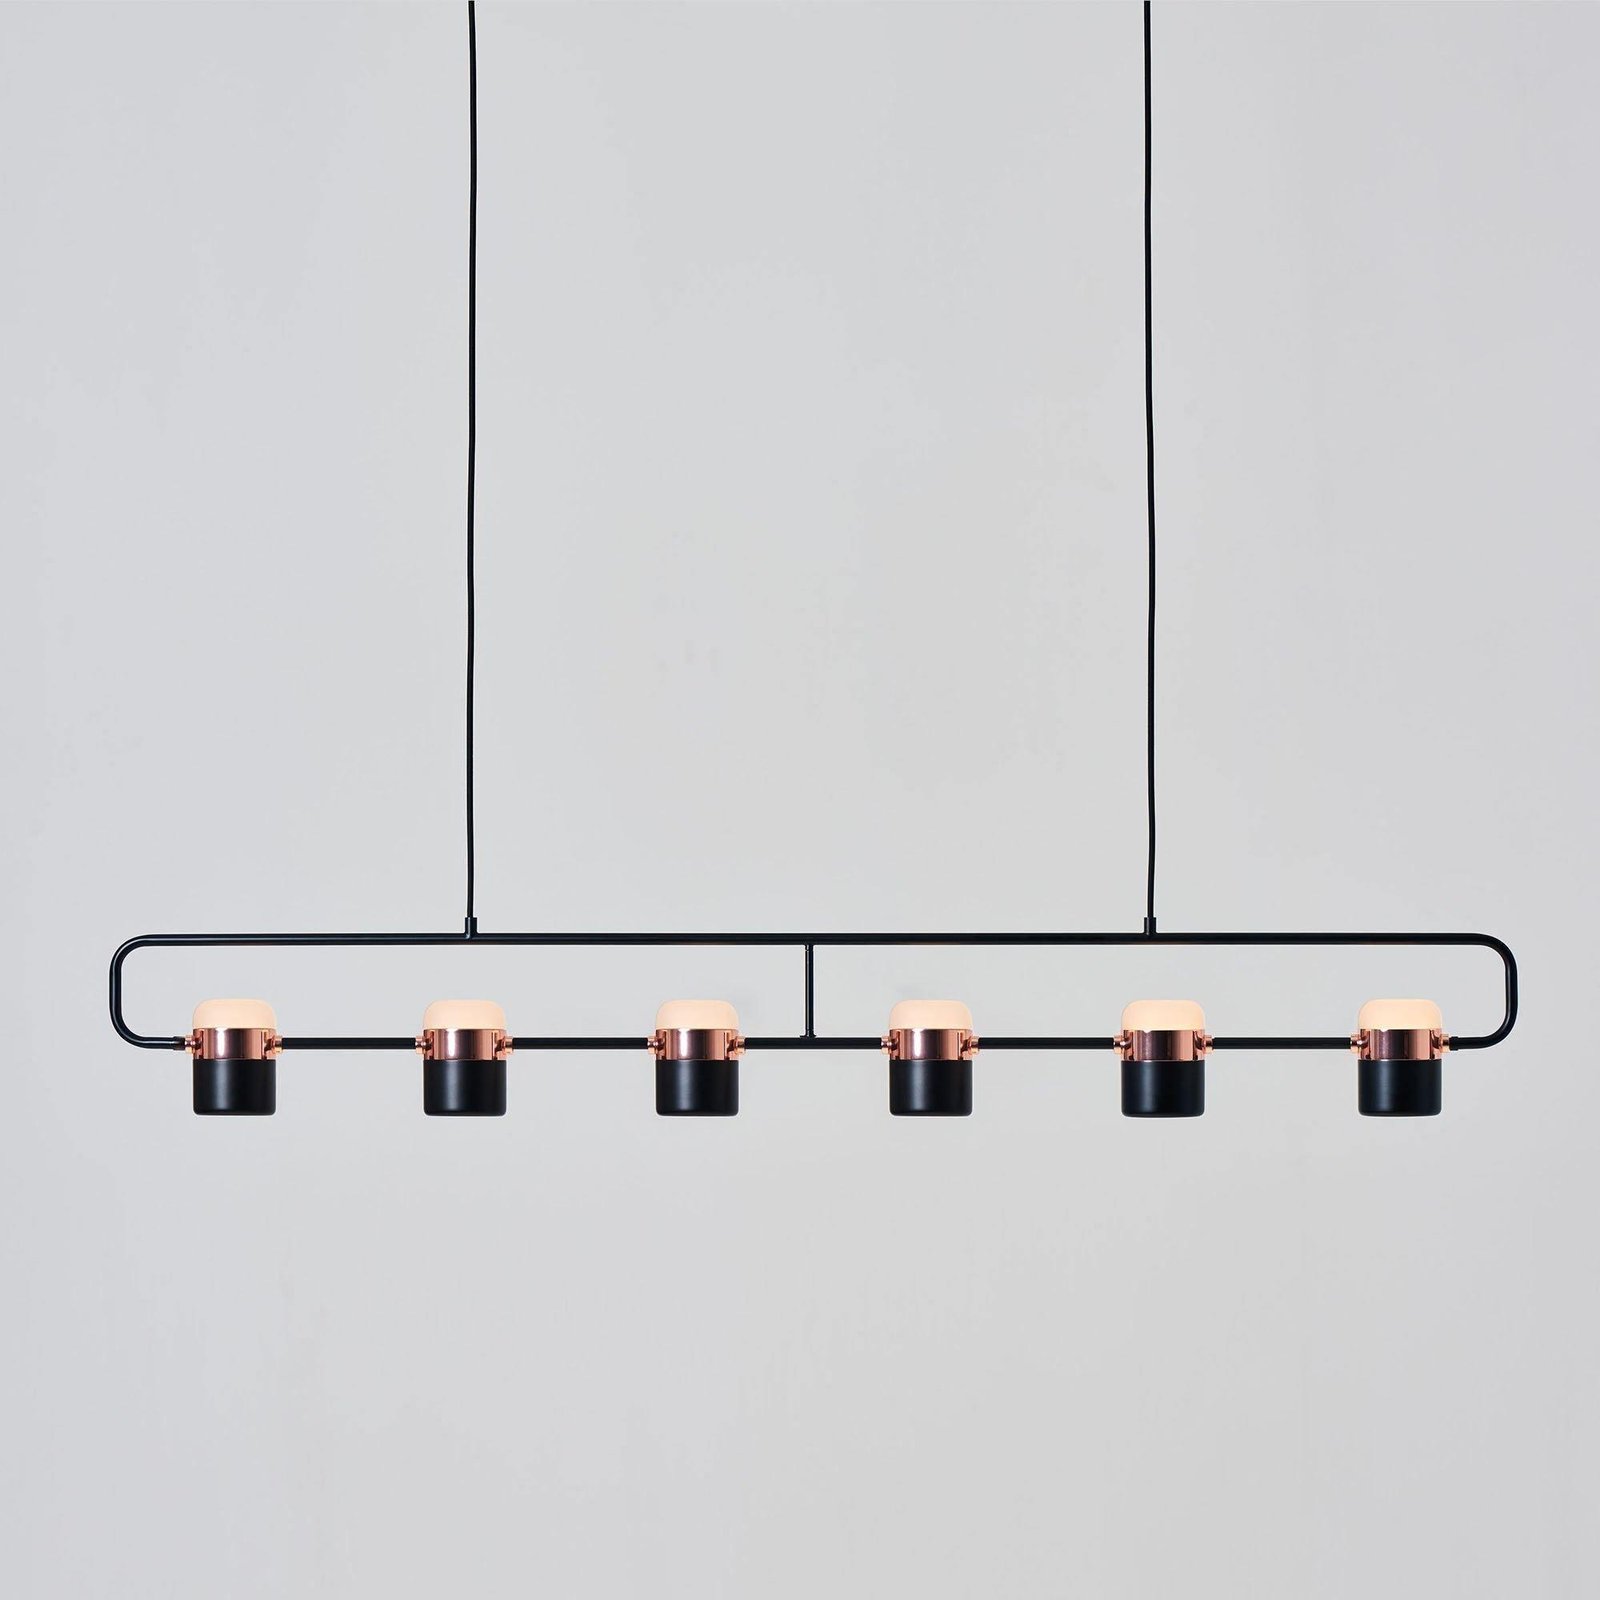 Ling P1 LED Pendant Light with 6 Heads: 53.2″ Length x 7.1″ Height, 135cm Length x 18cm Height, Copper and Black Finish, Cold White Illumination